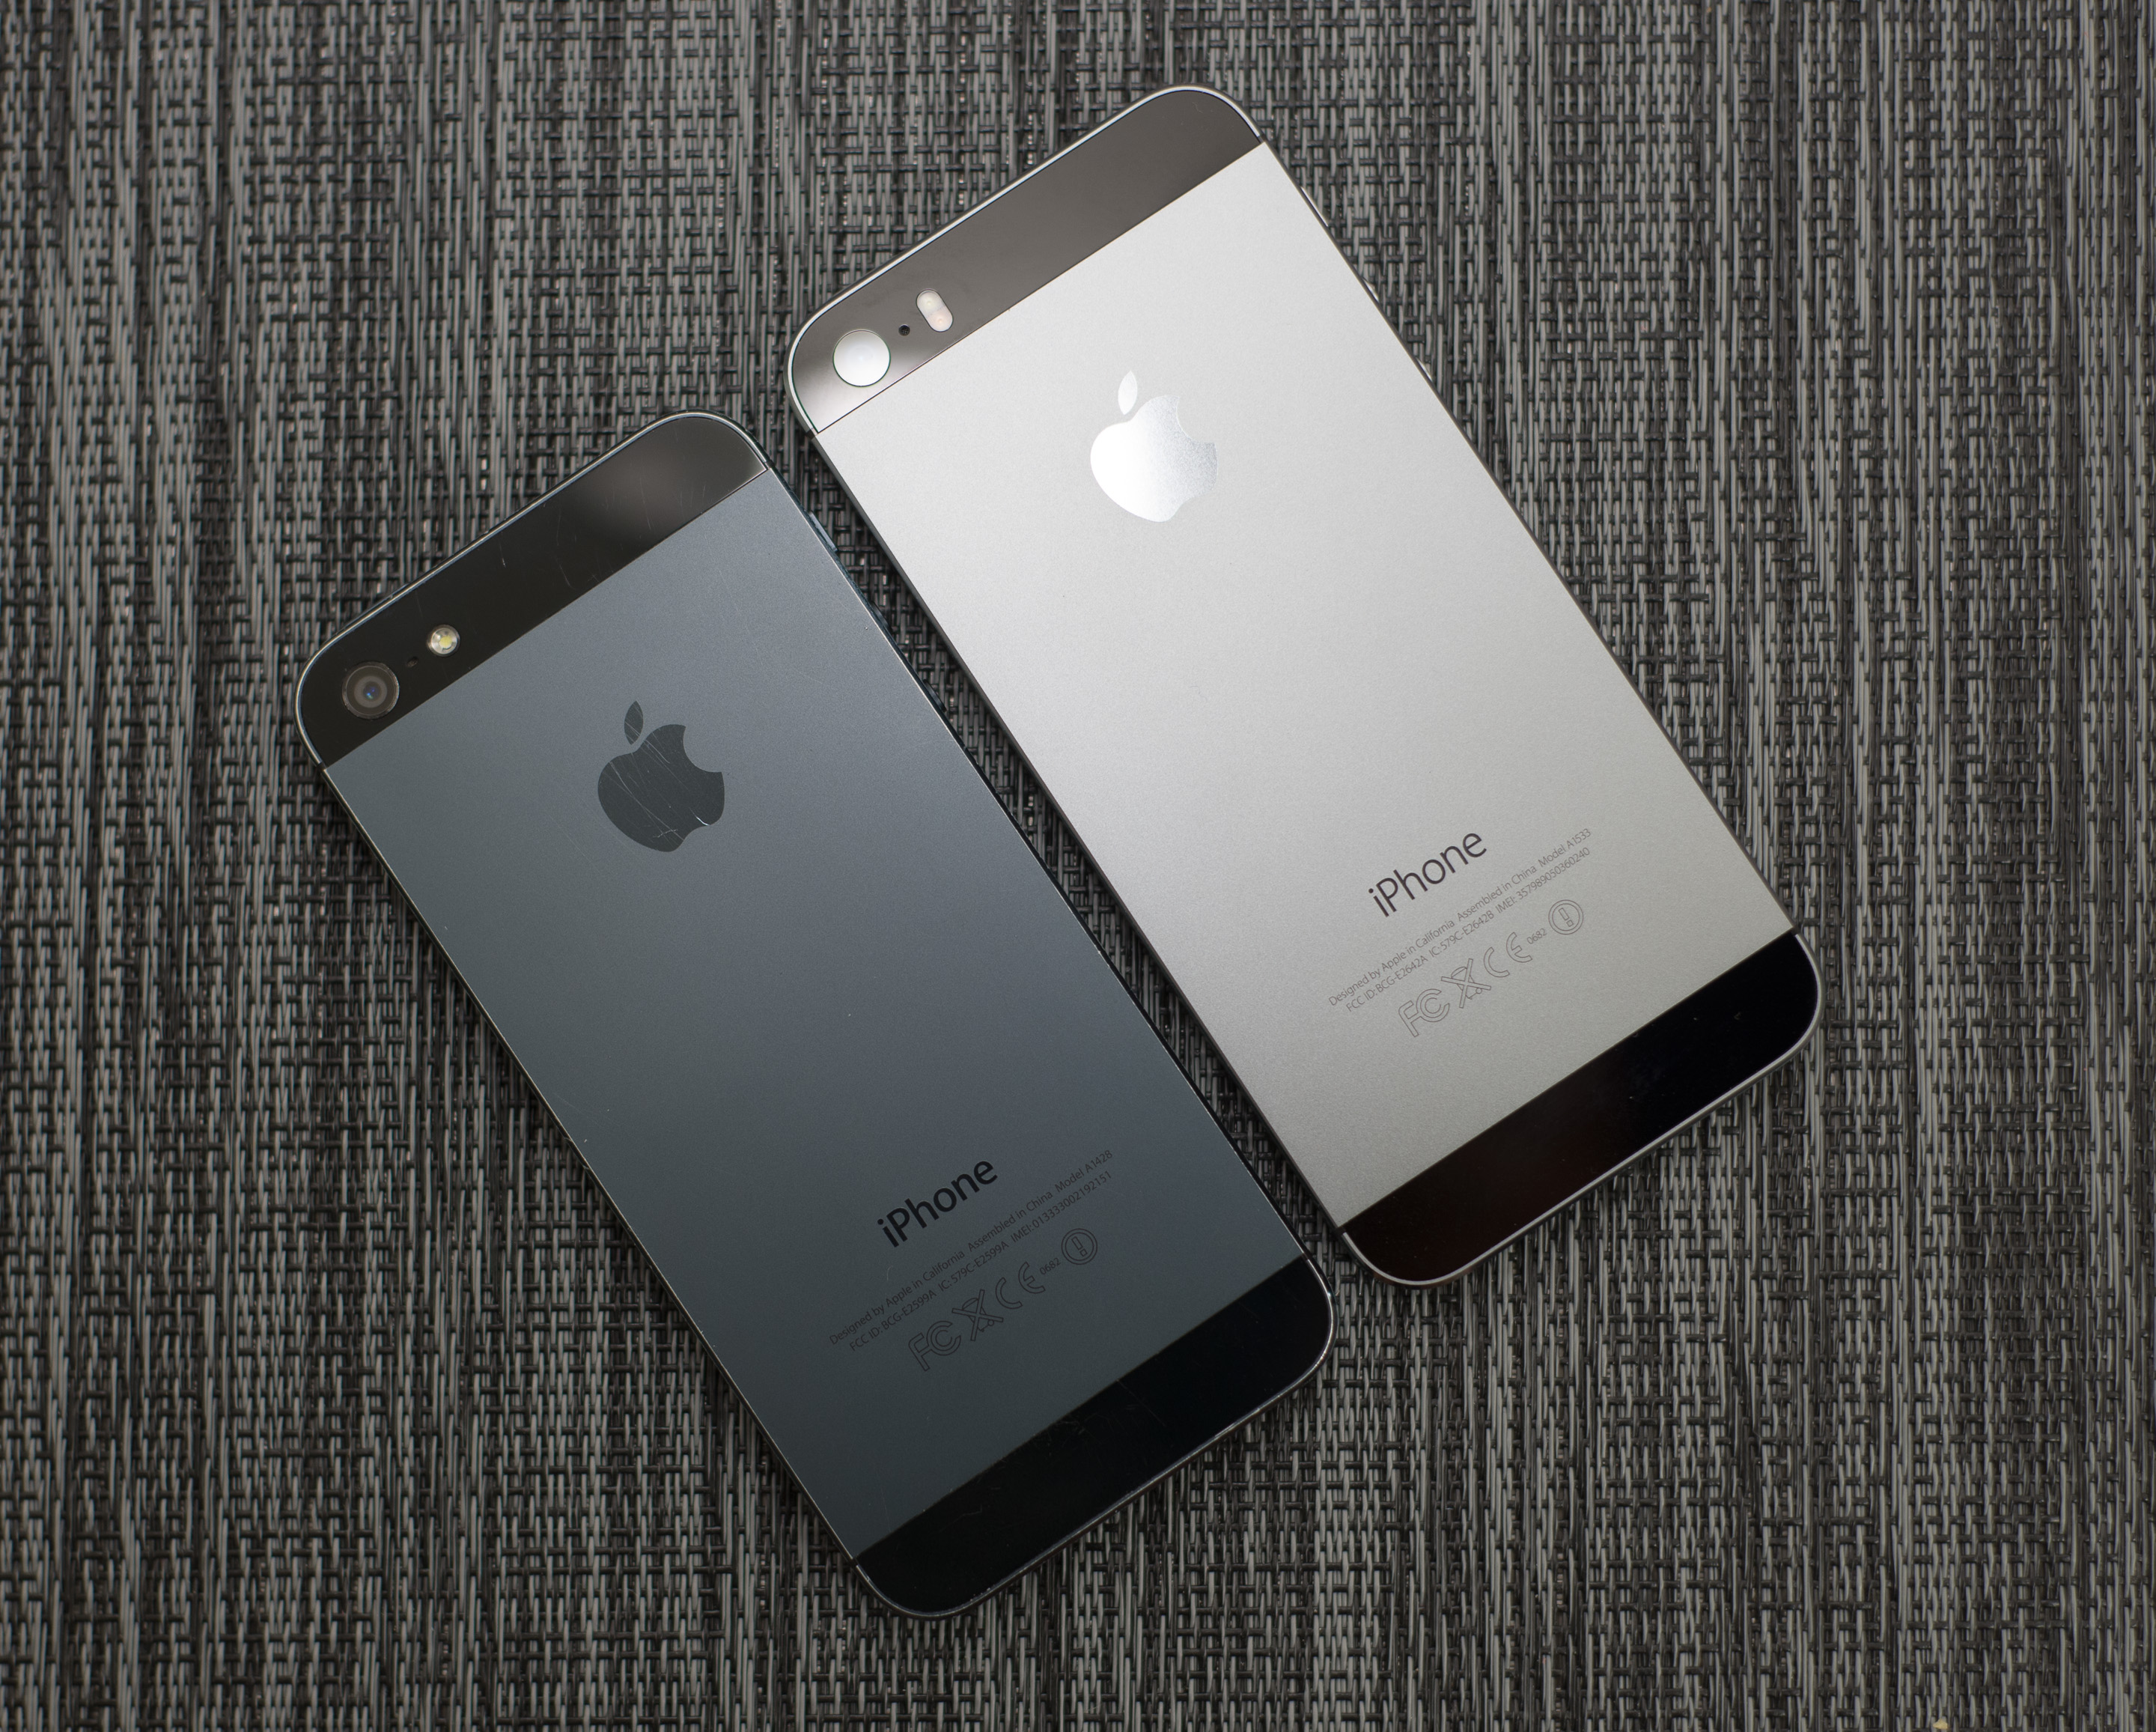 "Apple iPhone 6 64GB" specifications | detailed parameters